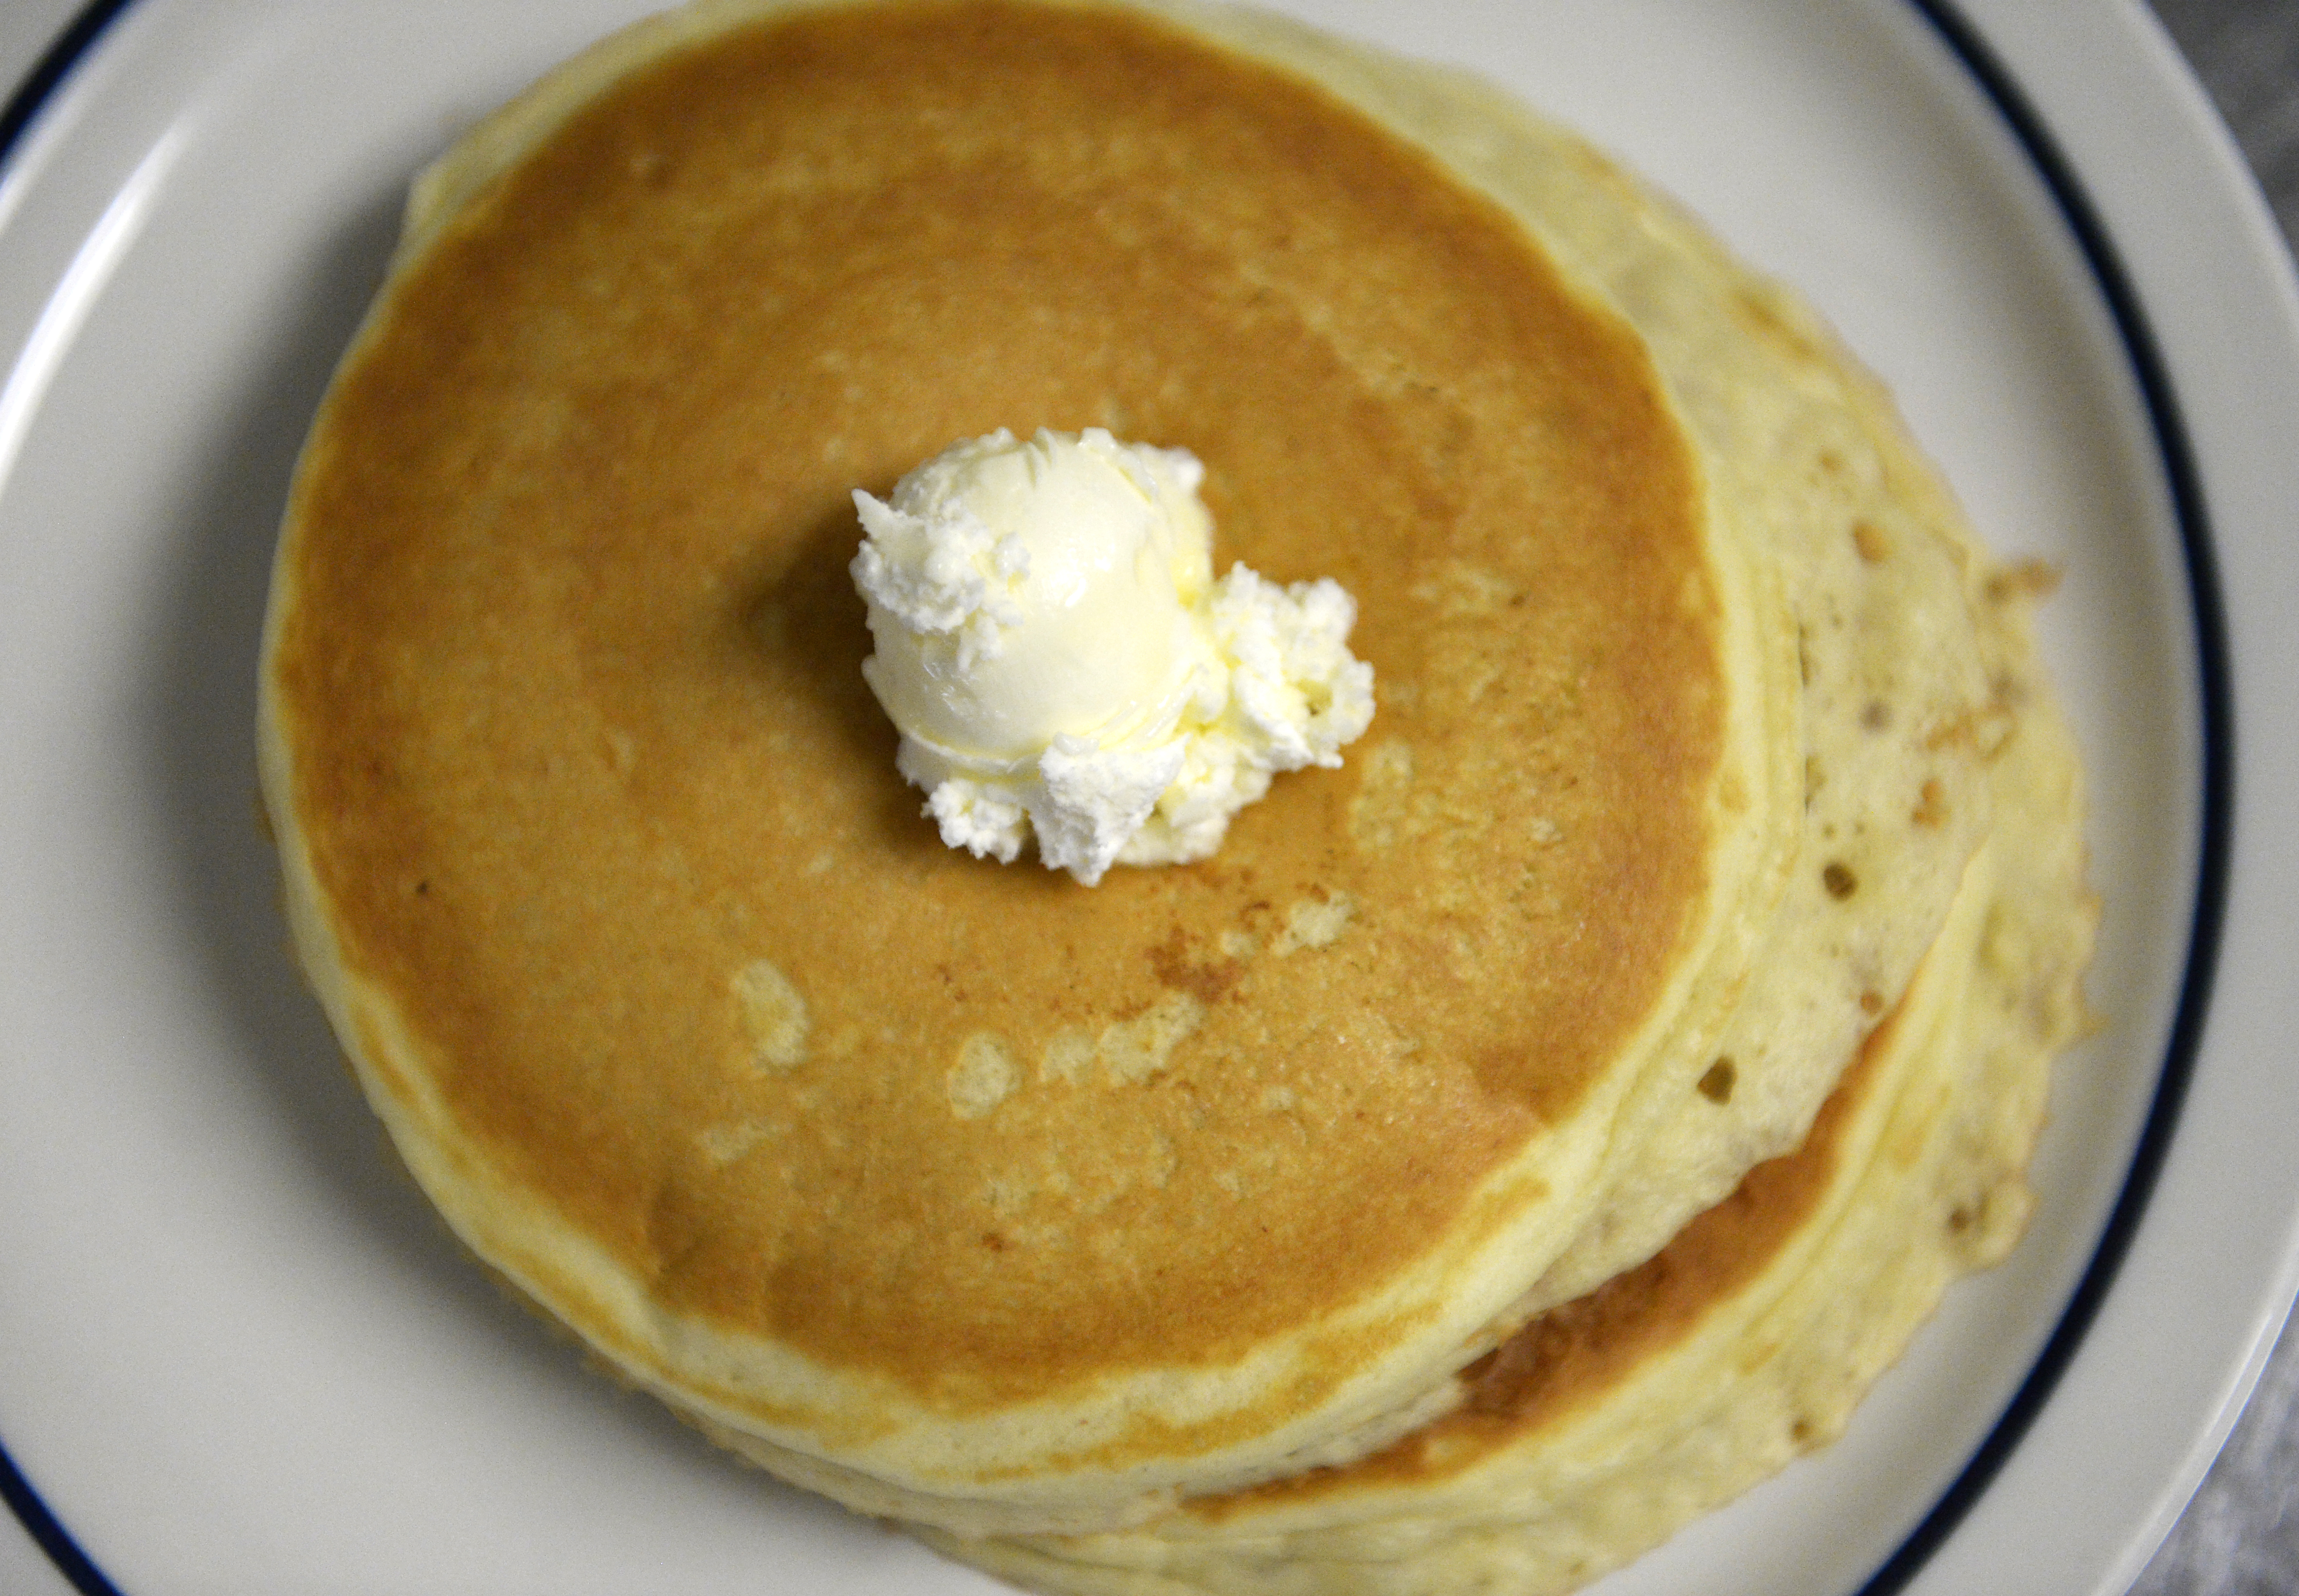 IHOP Is Offering 3 Pancakes for 60 Cents Today. Here's How to Get Yours